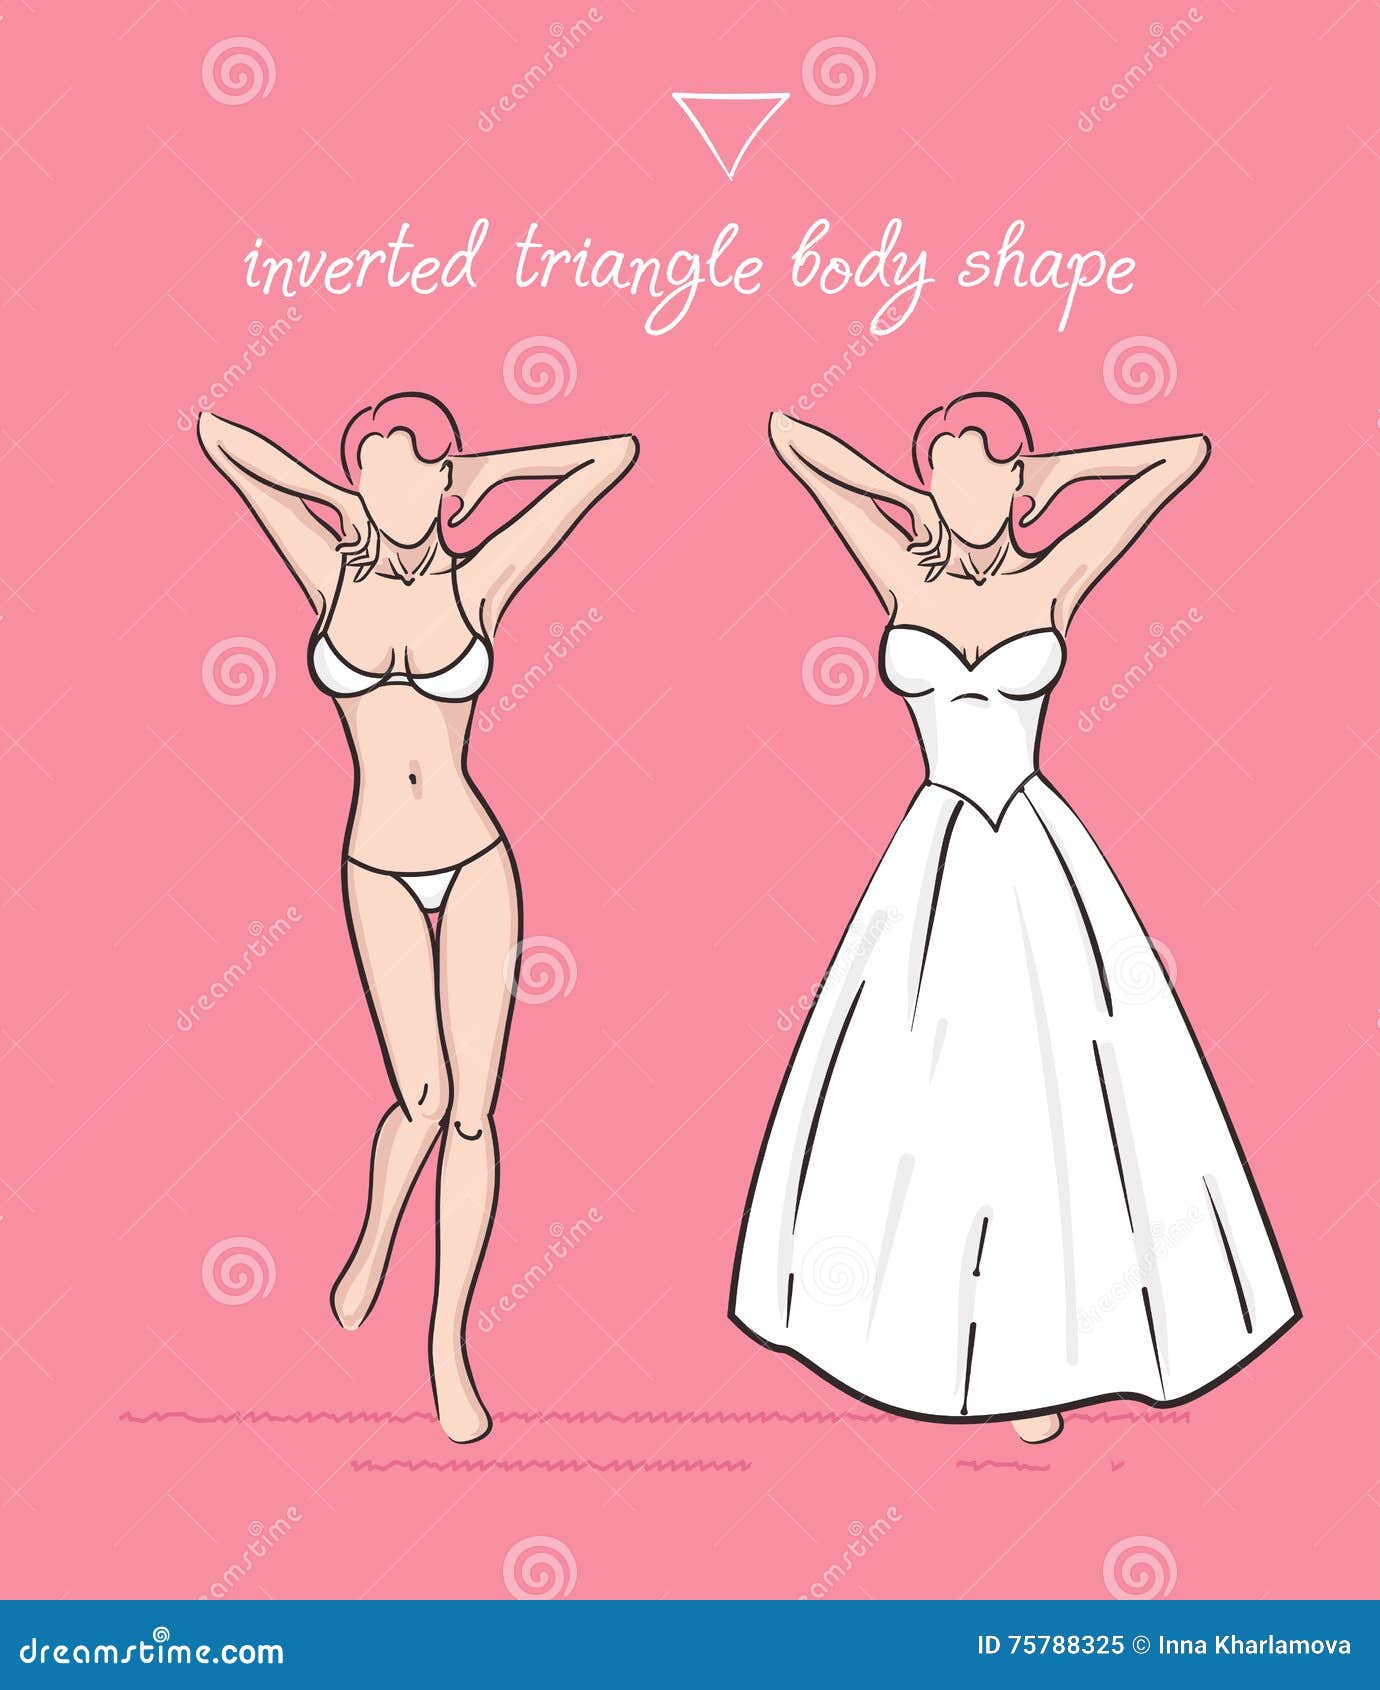 4 Ways to Dress the Inverted Triangle Body Shape - wikiHow